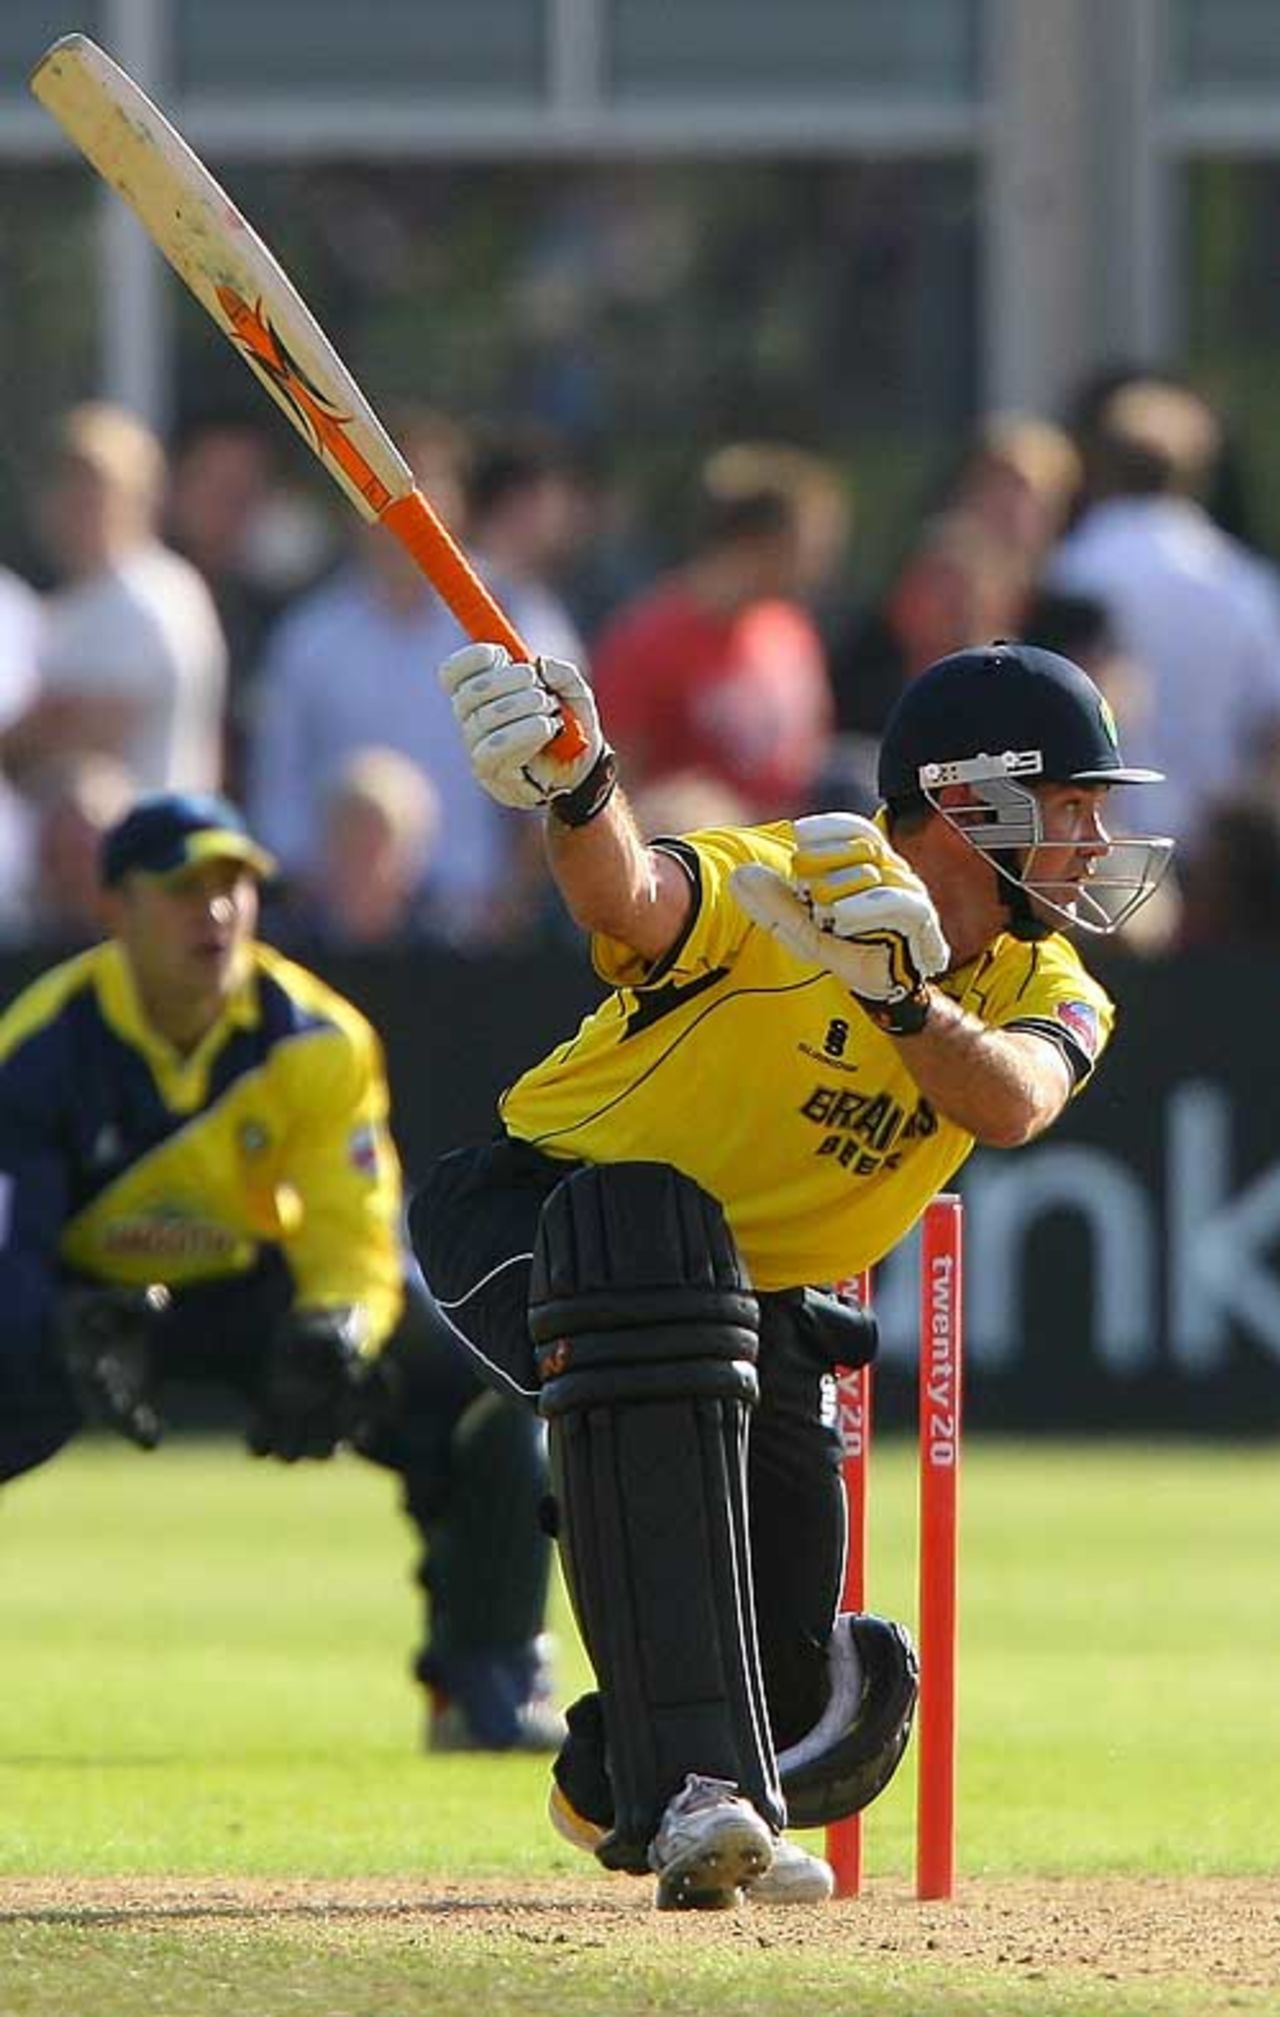 Jimmy Maher's 26 was the highest score for Glamorgan in the Twenty20 Cup match against Gloucestershire, Bristol, July 6, 2007